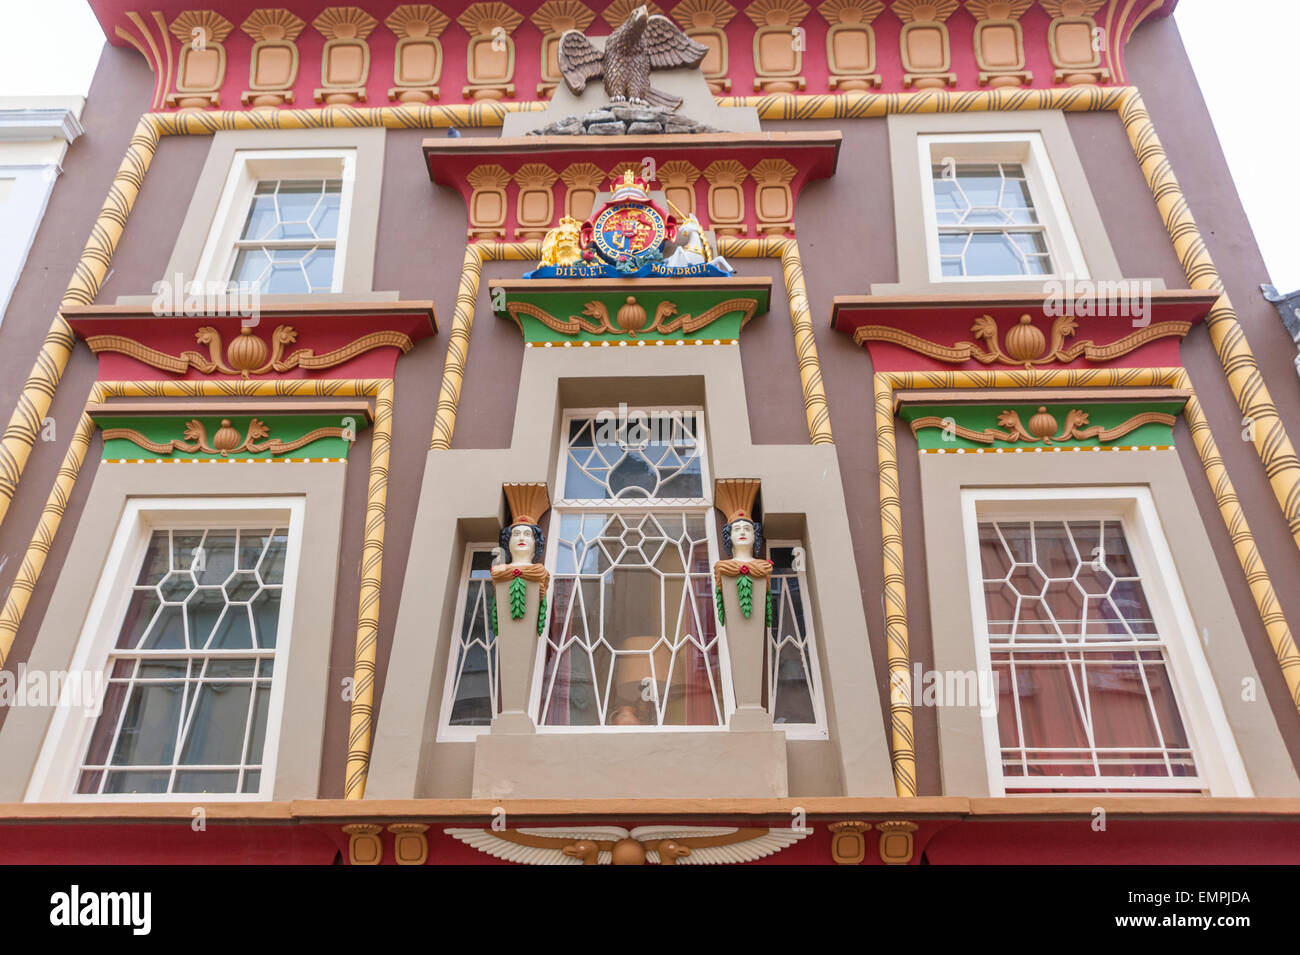 The egyptian house in Penzance cornwall Stock Photo